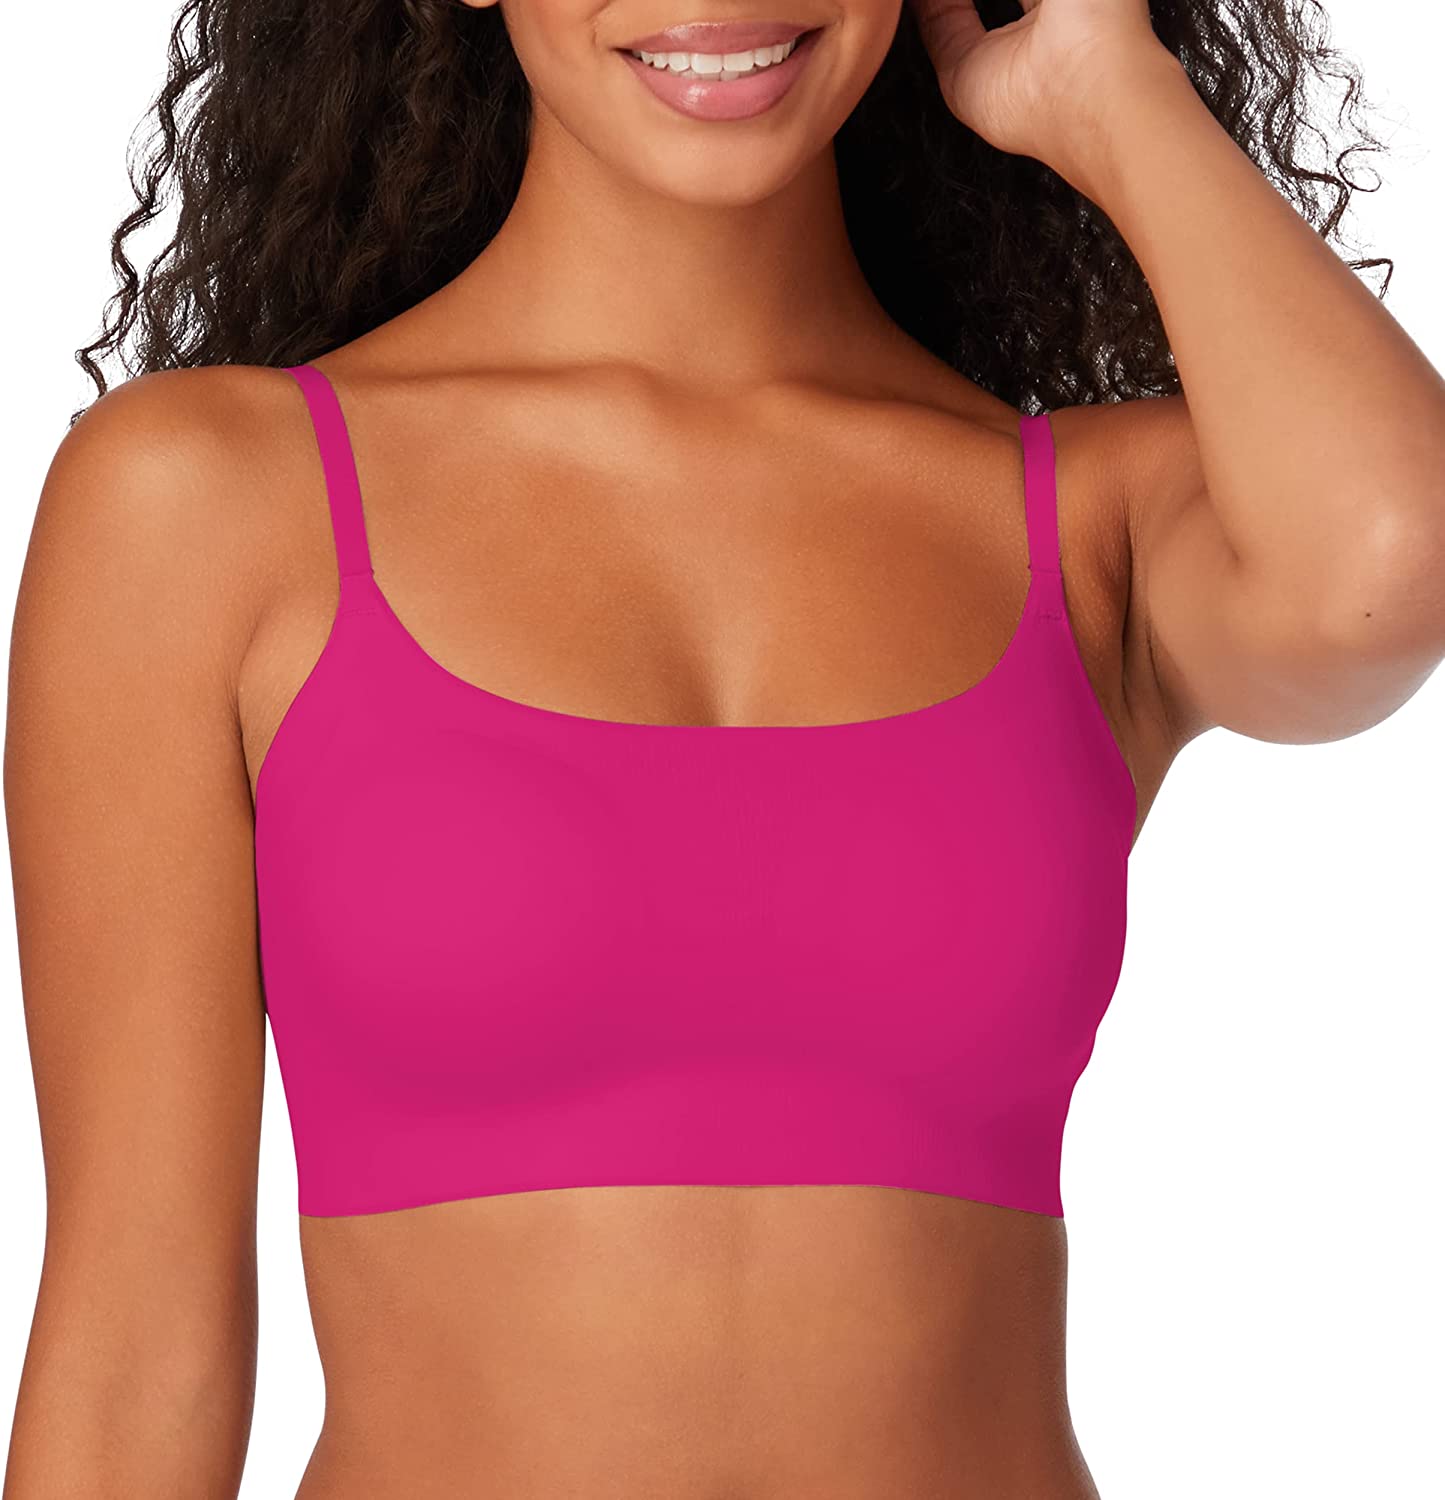 Pure Comfort Bralette with Smoothing Fit, Wireless Bra, No-Roll Lightweight T-Shirt Bra for Everyday Wear